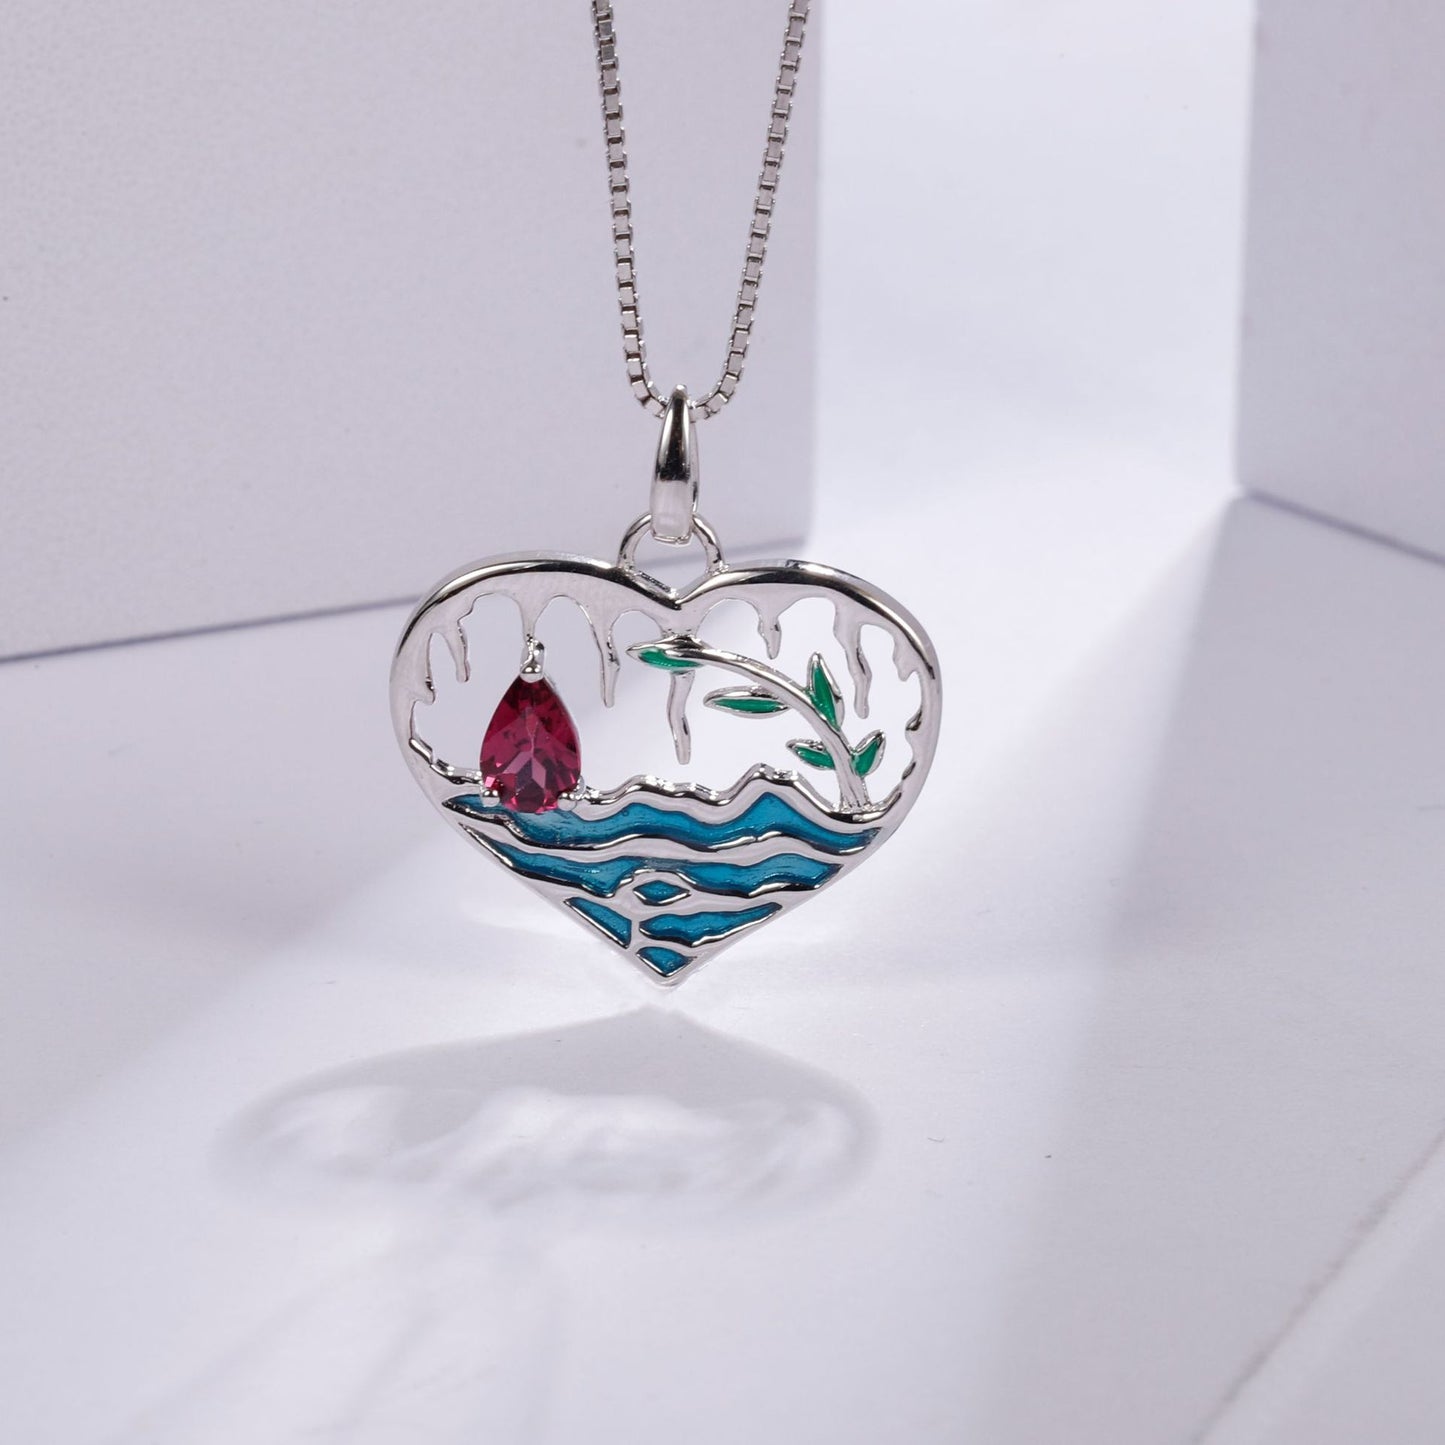 Natural Colourful Gemstone Enamel Lake In The Heart Pendant Silver Necklace for Women